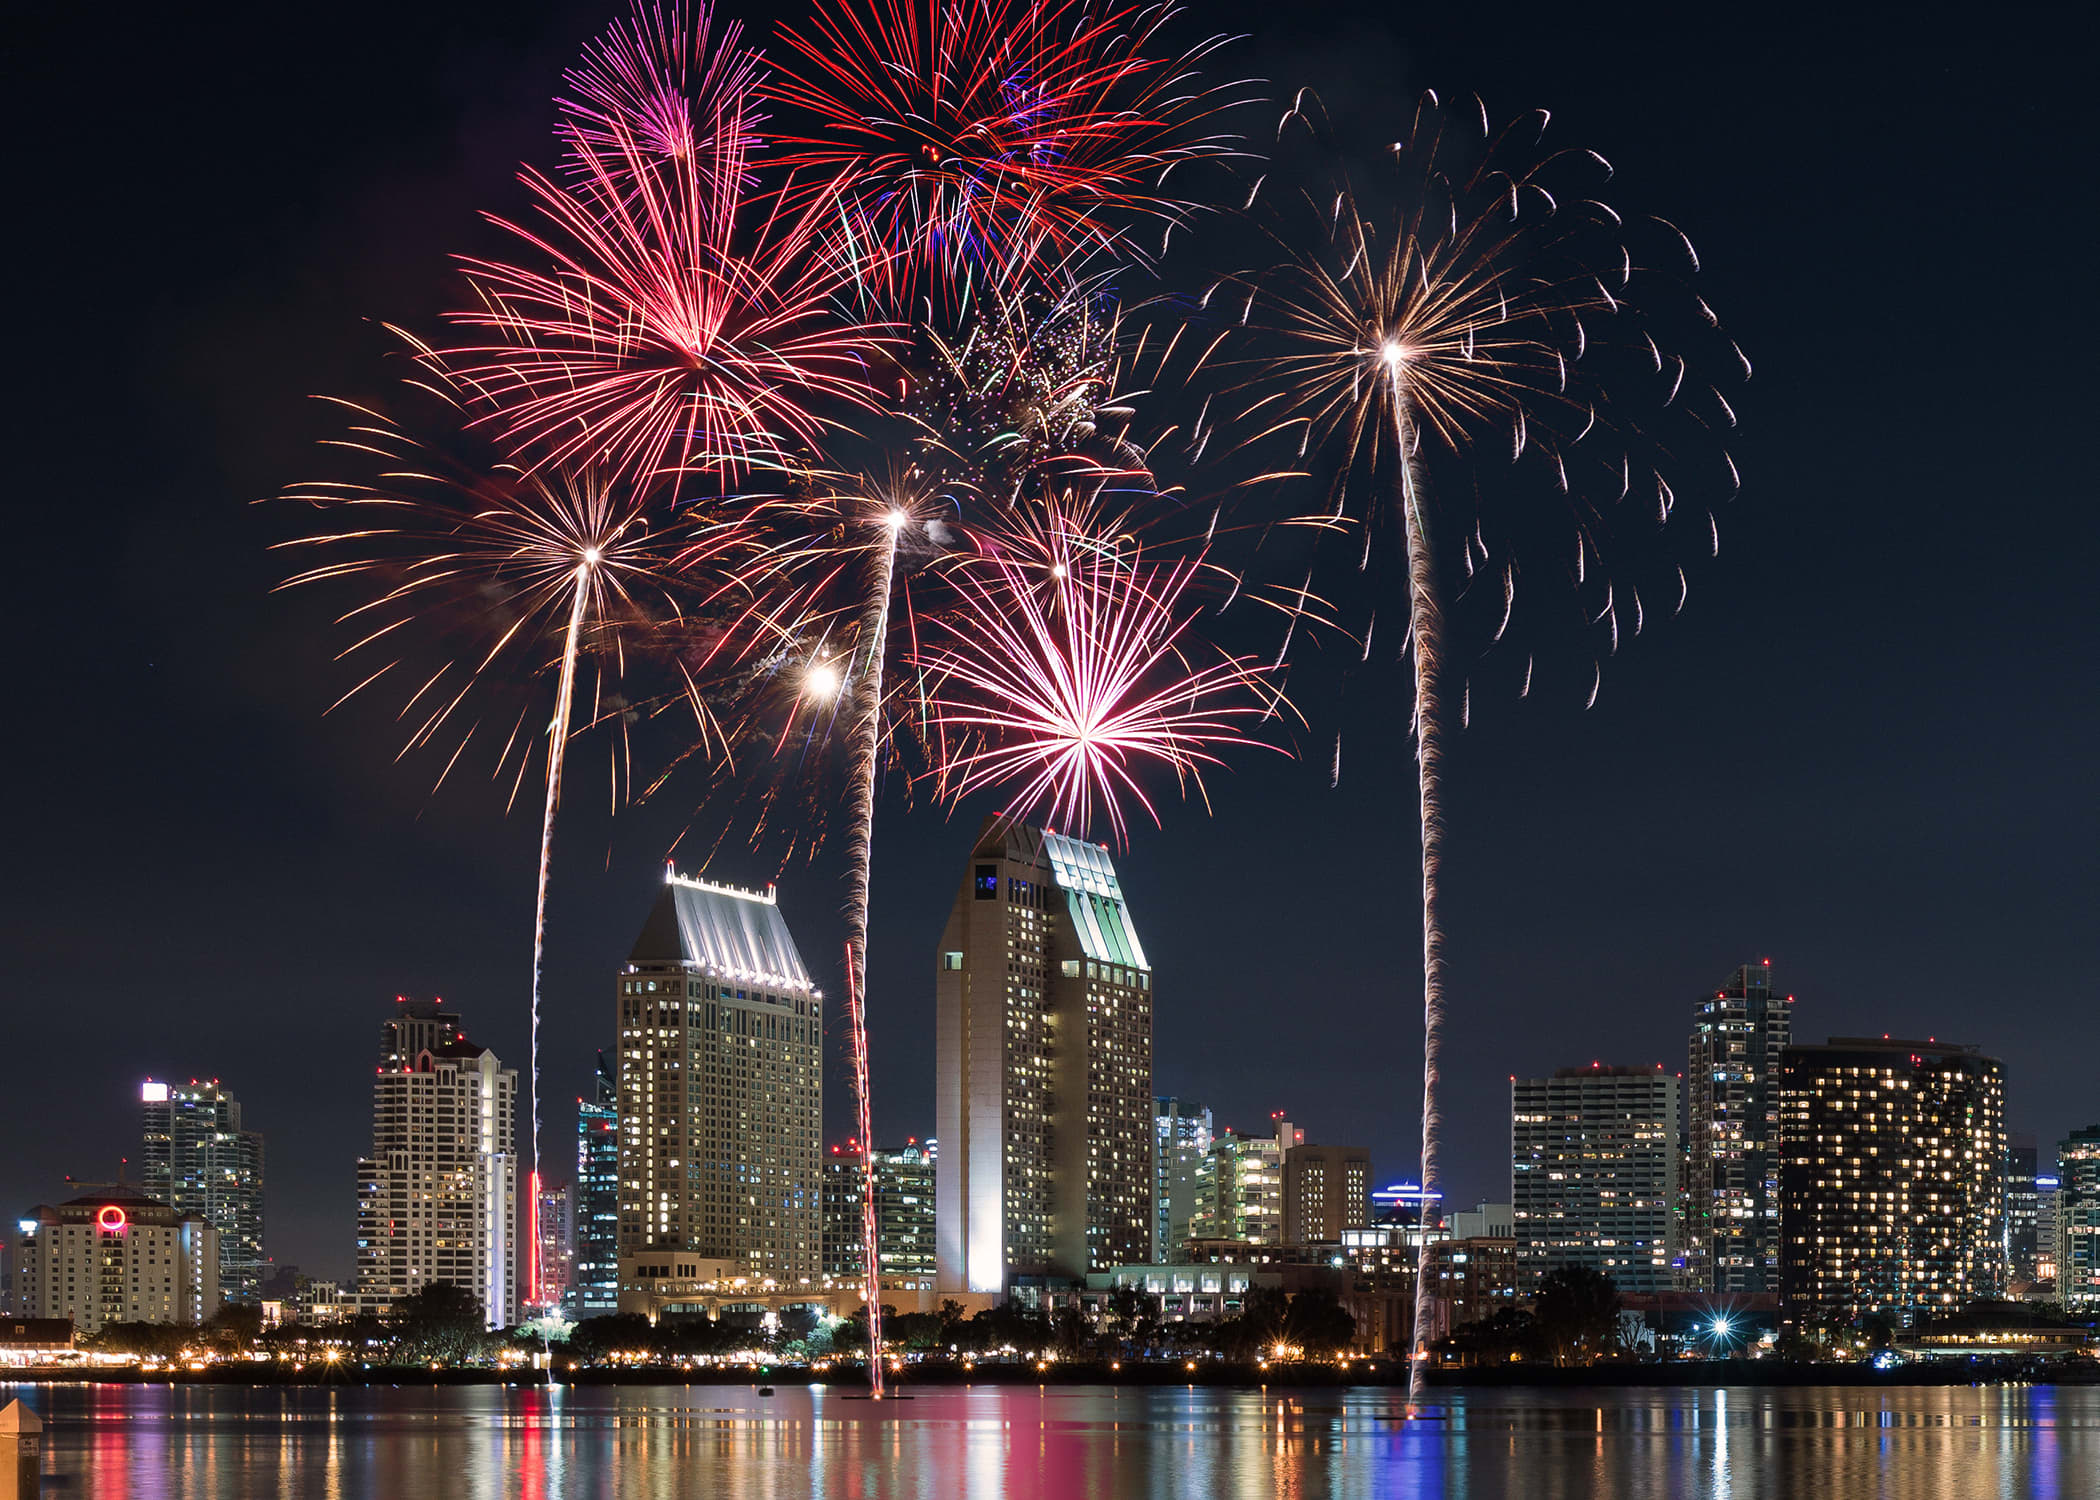 Flipboard: It's not too late to book a last-minute New Year's Eve adventure2100 x 1500